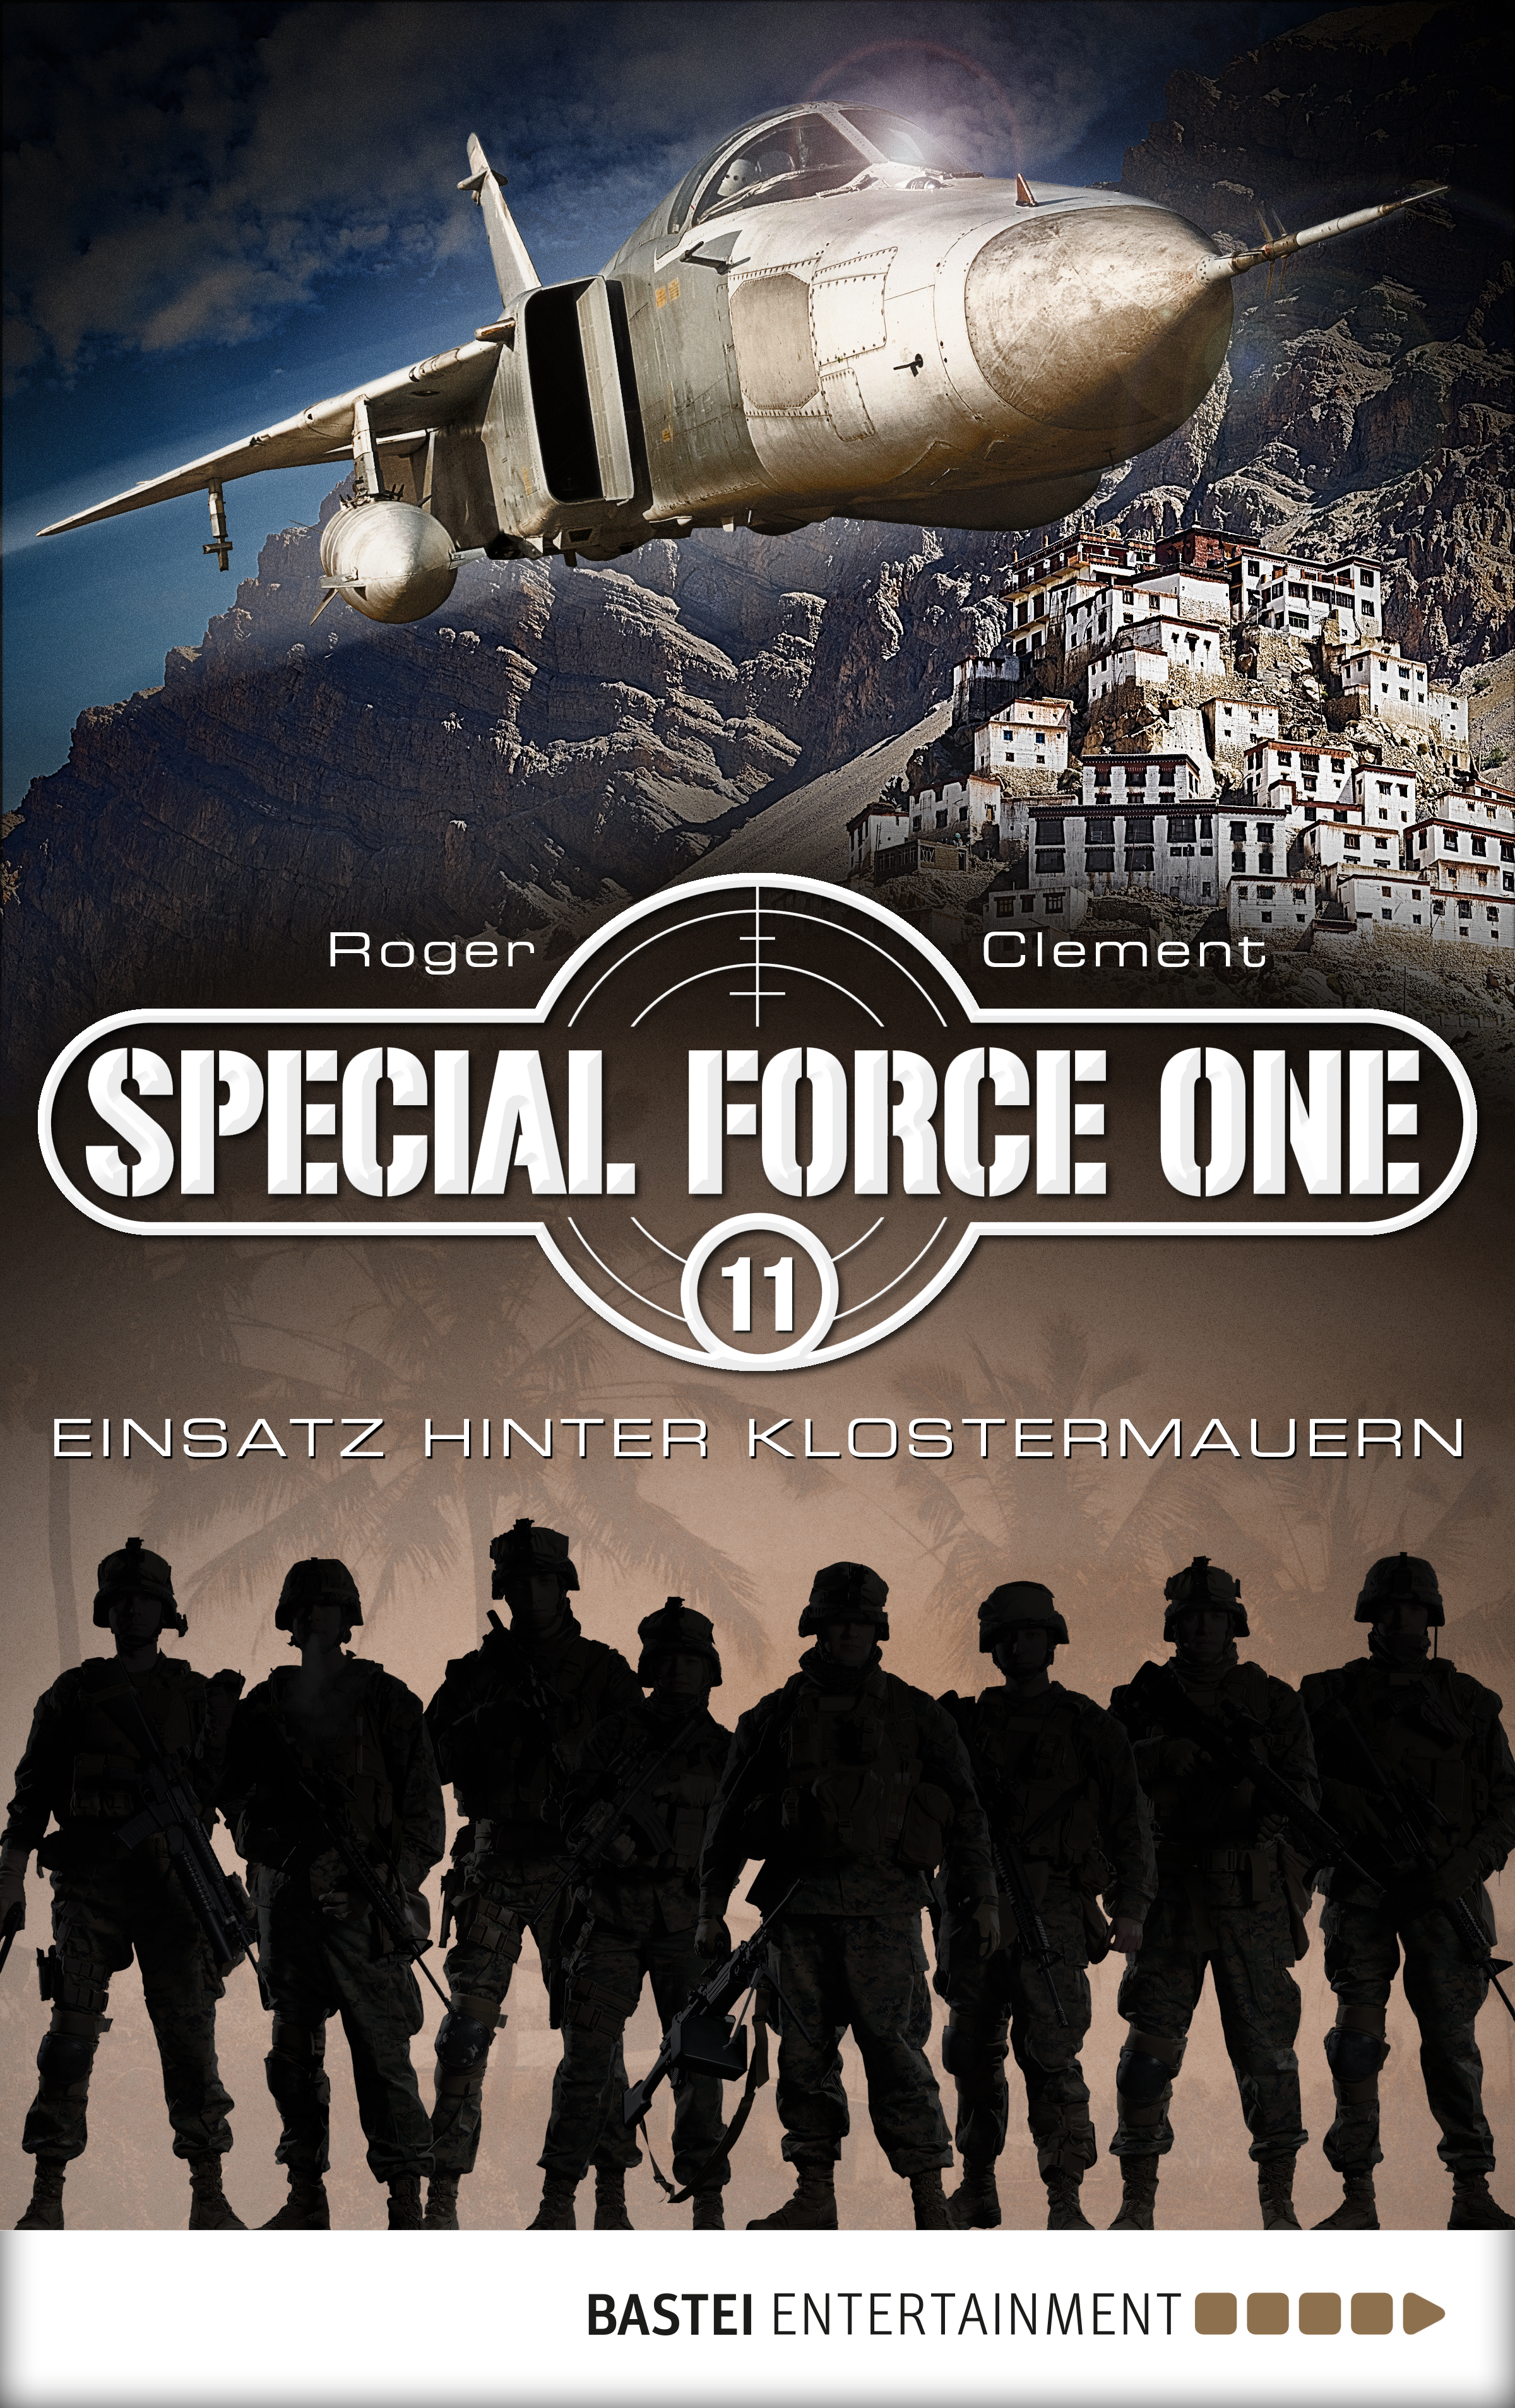 Special Force One 11